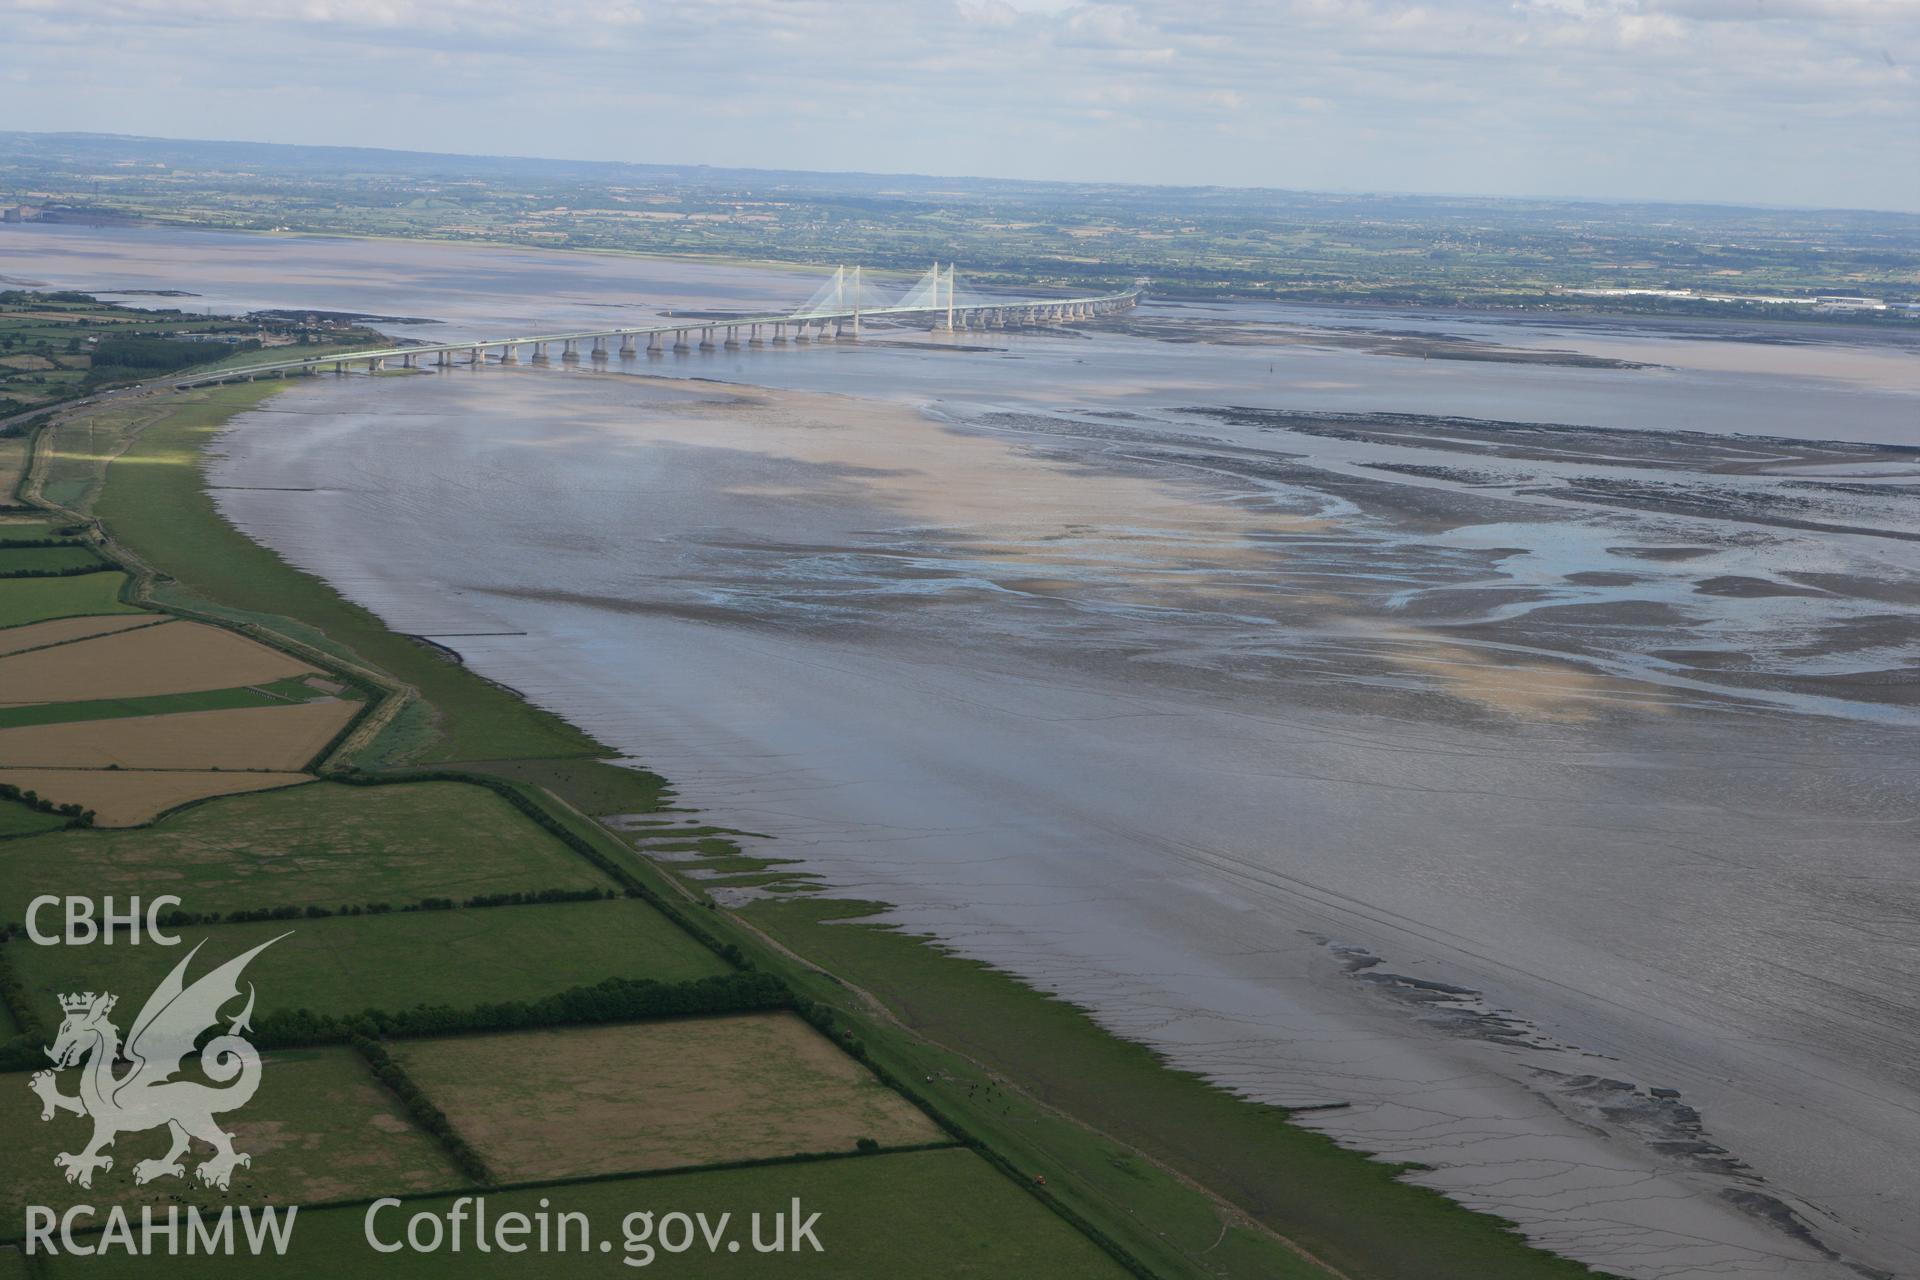 RCAHMW colour oblique photograph of the Second Severn Crossing, from the west. Taken by Toby Driver on 29/07/2010.